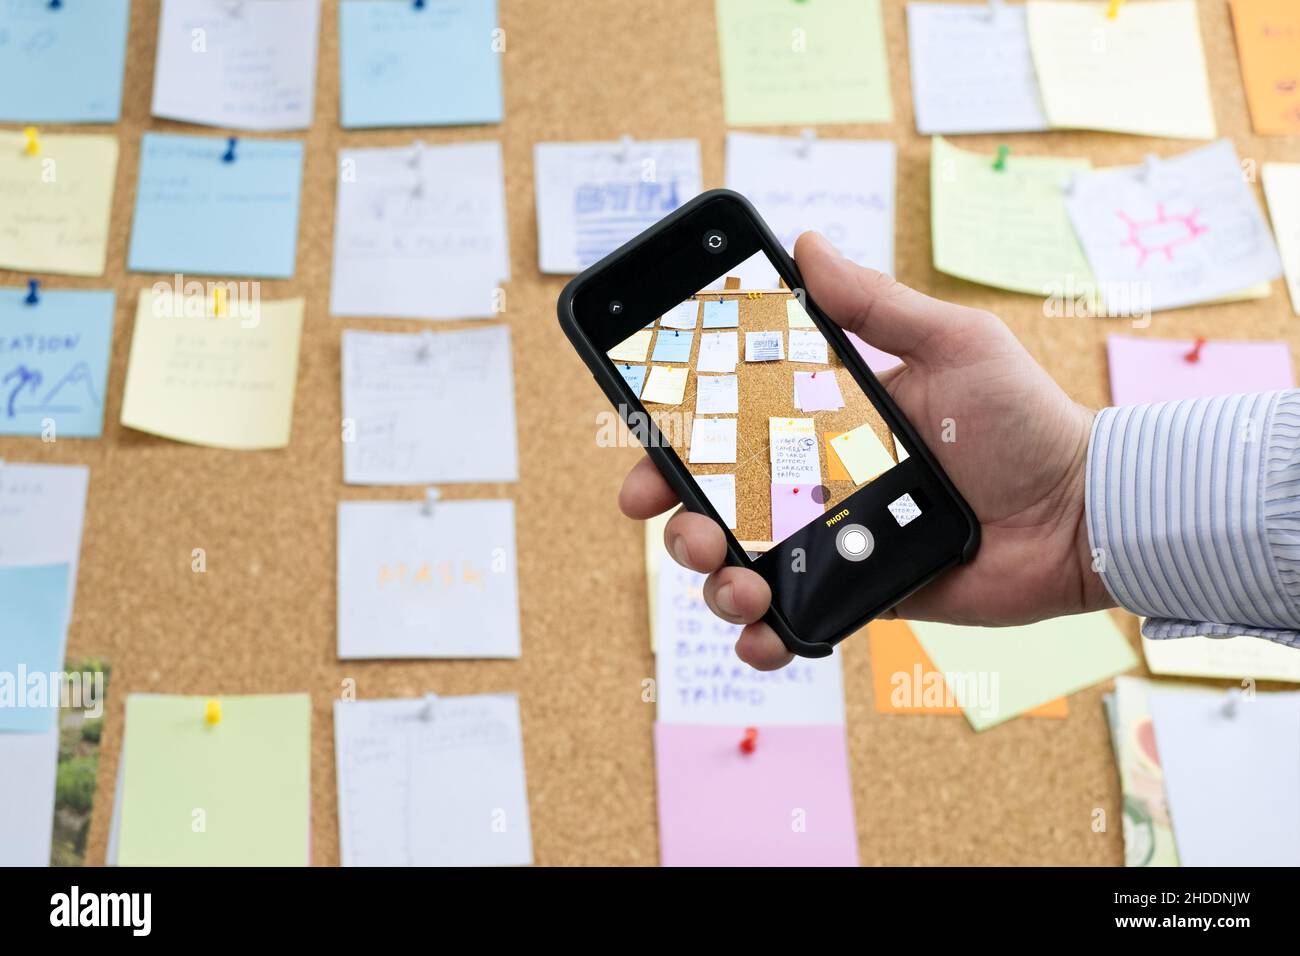 Photographing Using a mobile Smartphone for planning tasks and calendar events in the office, Sticky notes on a cork board in the background.  use of Stock Photo